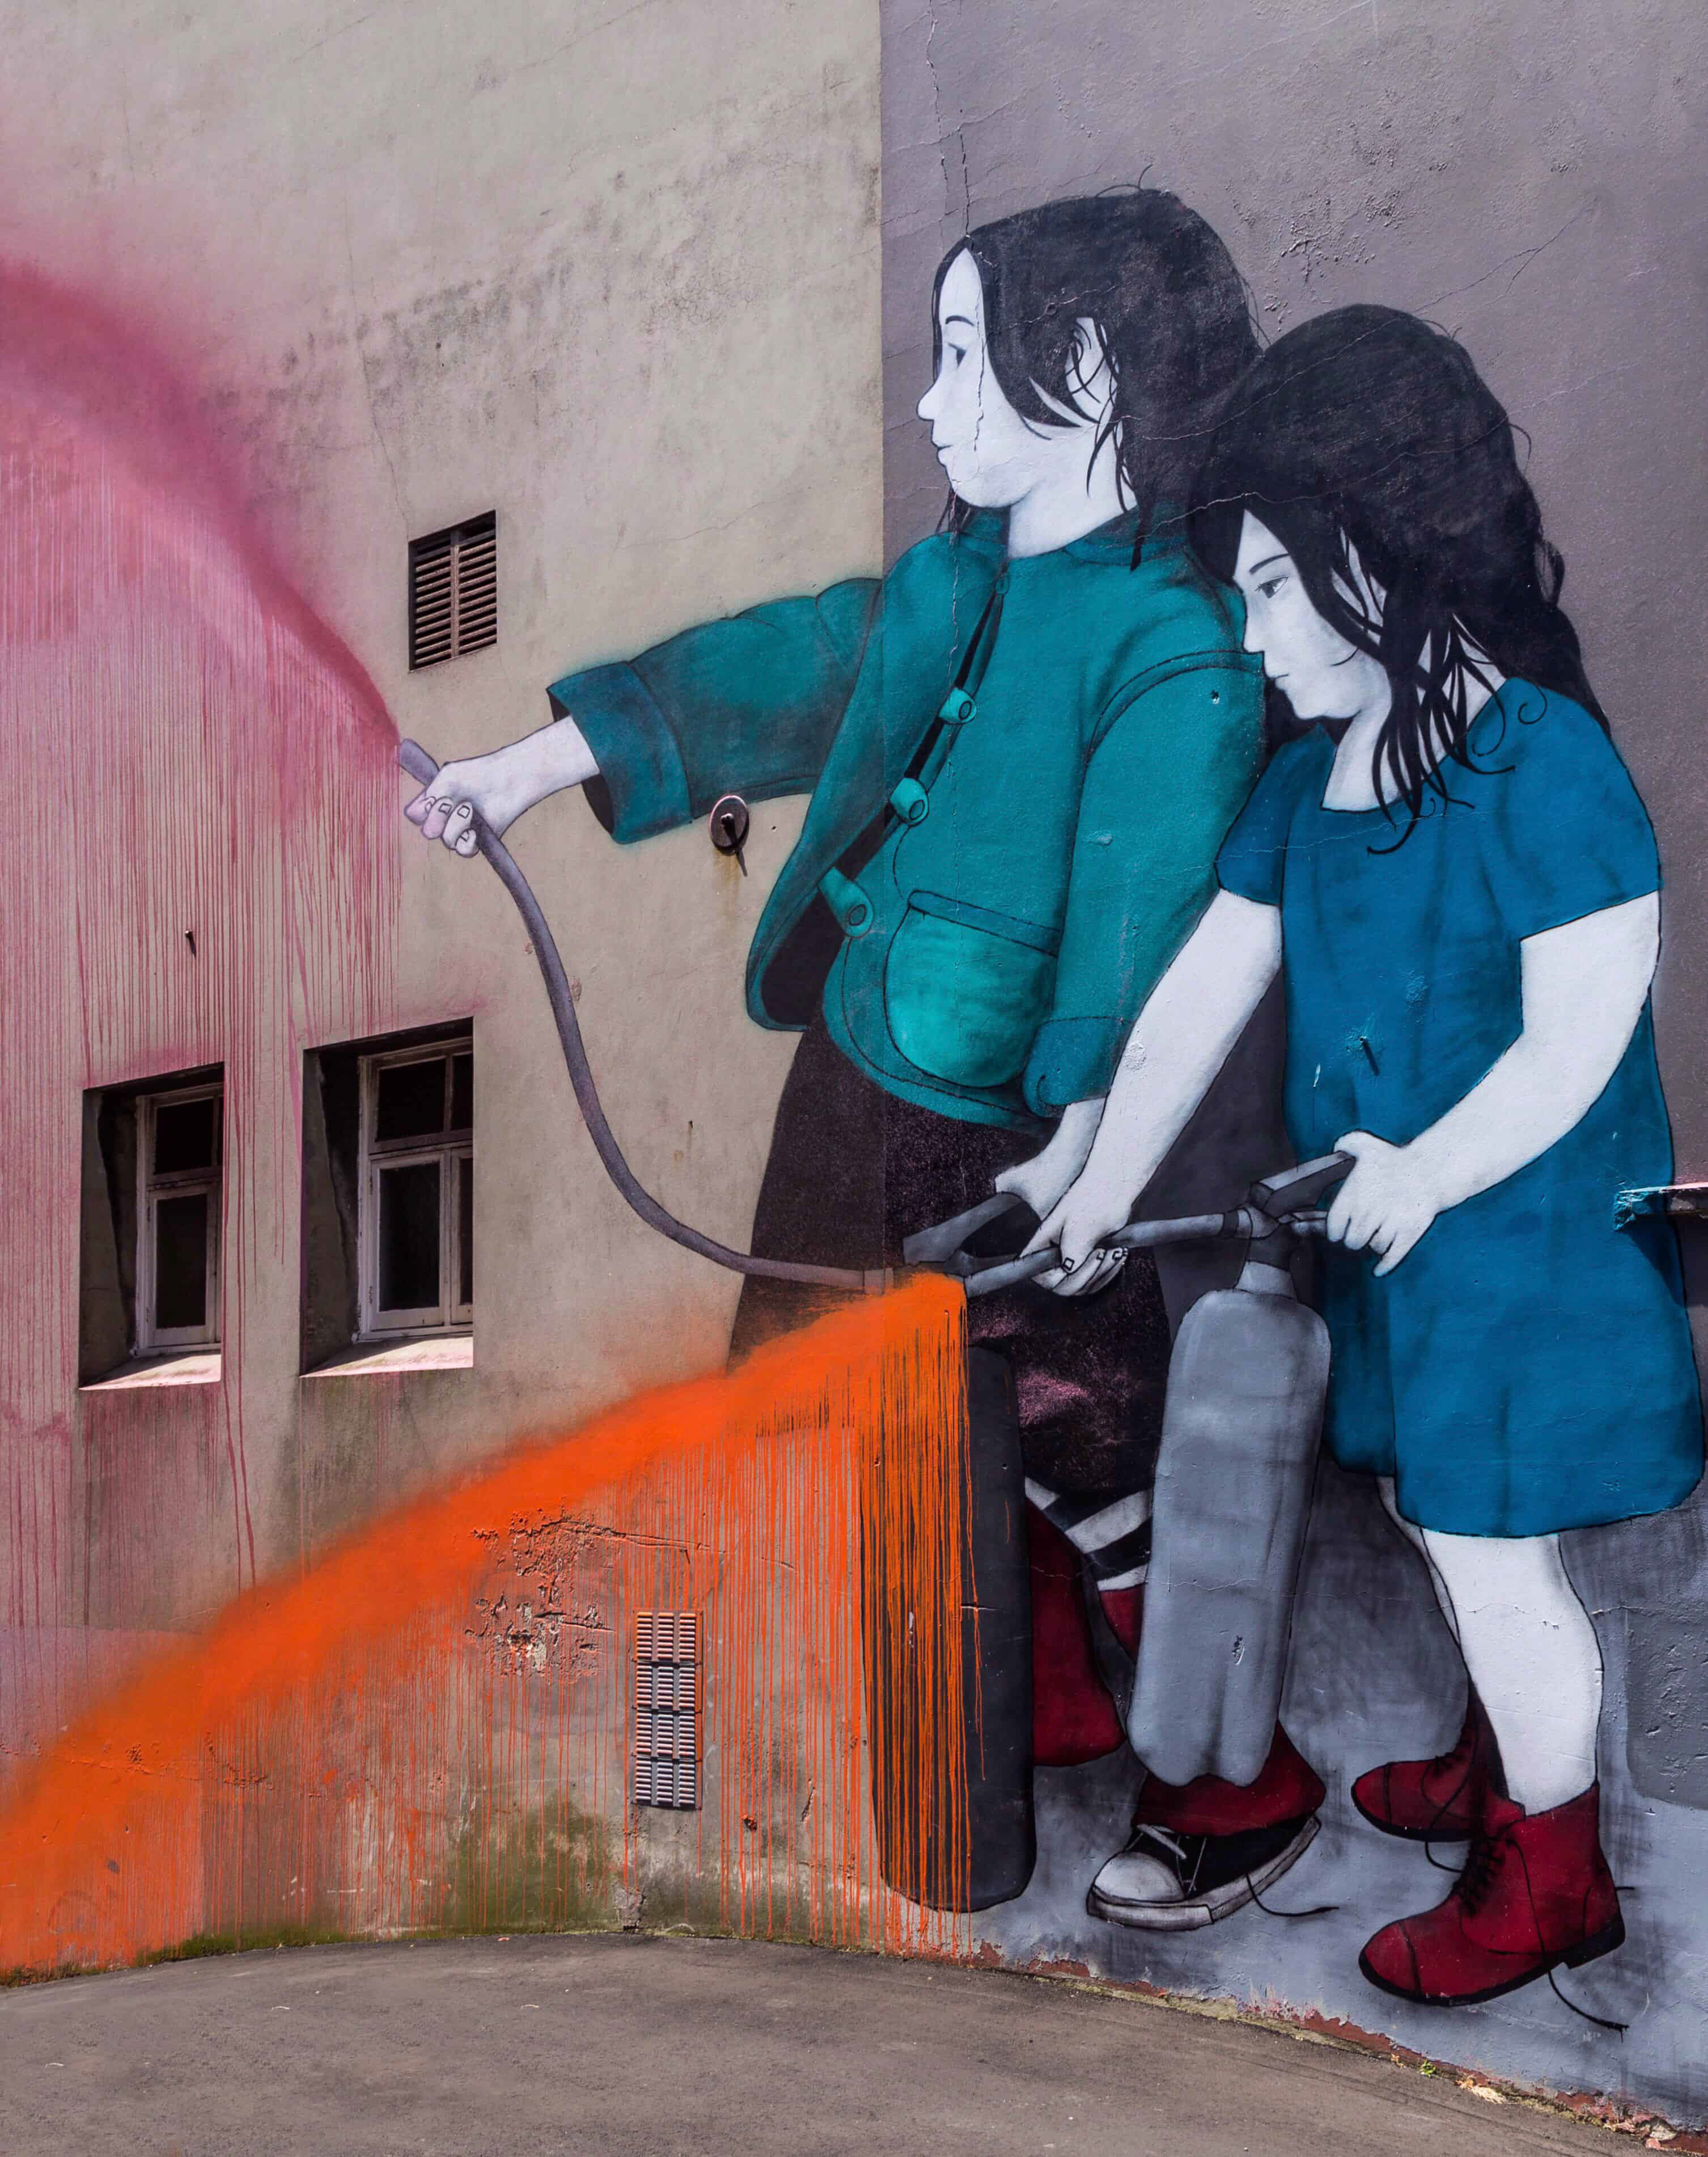 Children spraying paint - Art by Be Free